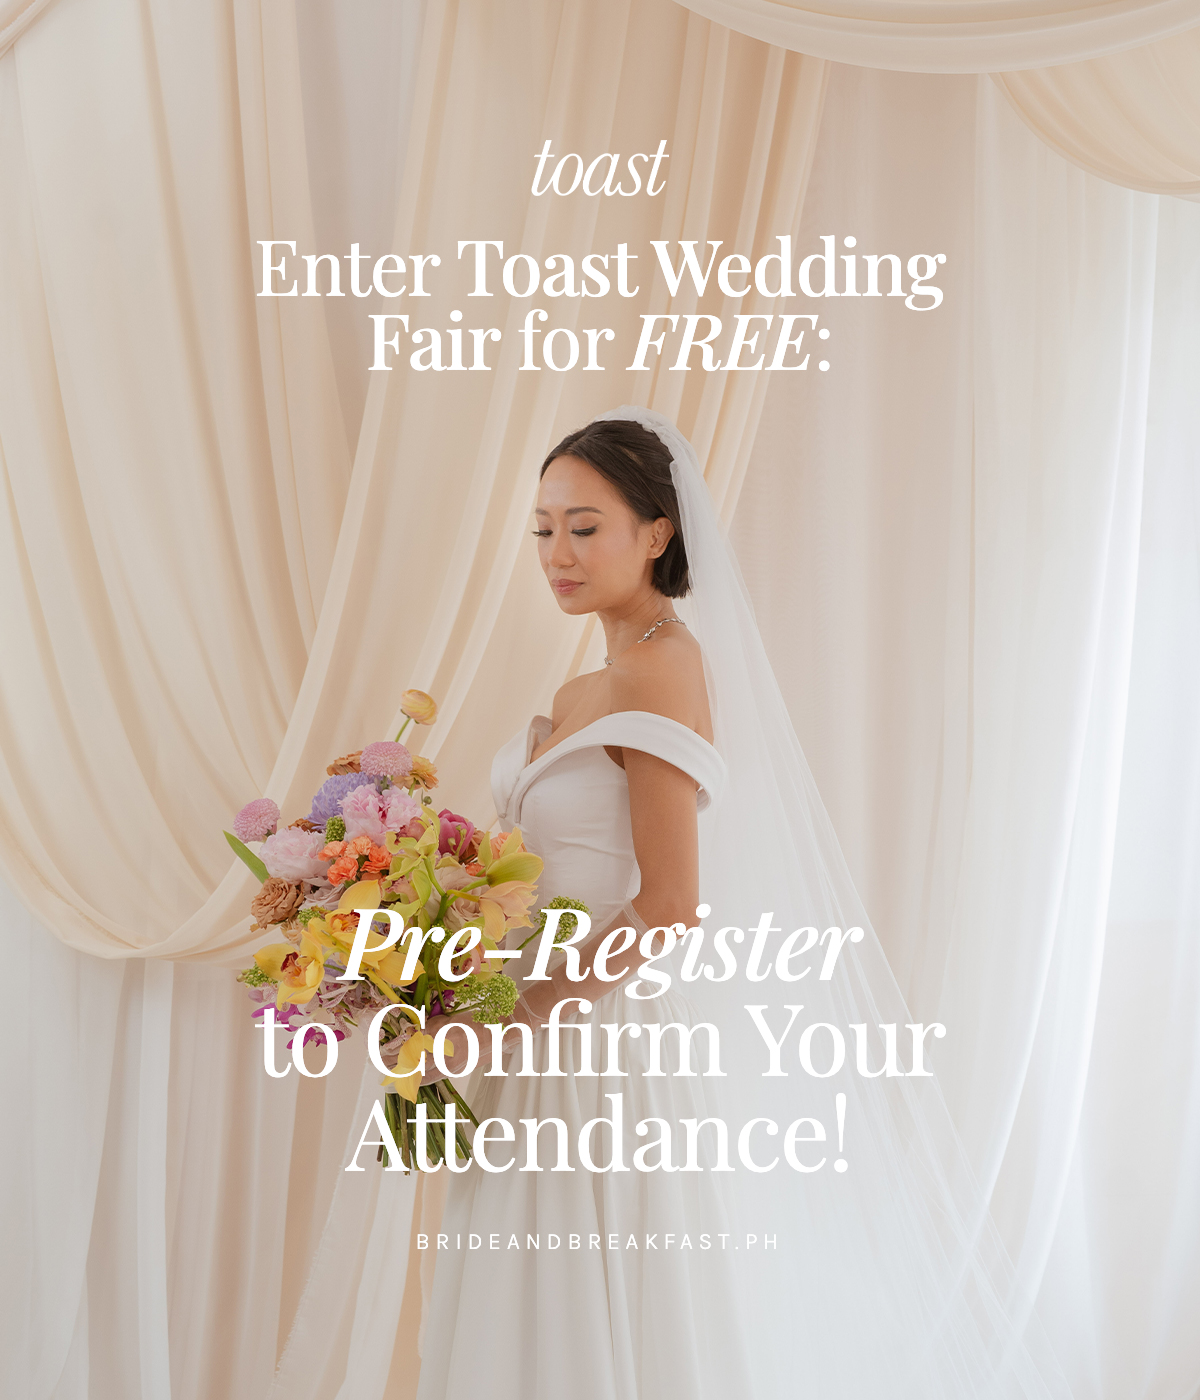 Enter Toast Wedding Fair for FREE: Pre-Register to Confirm Your Attendance!